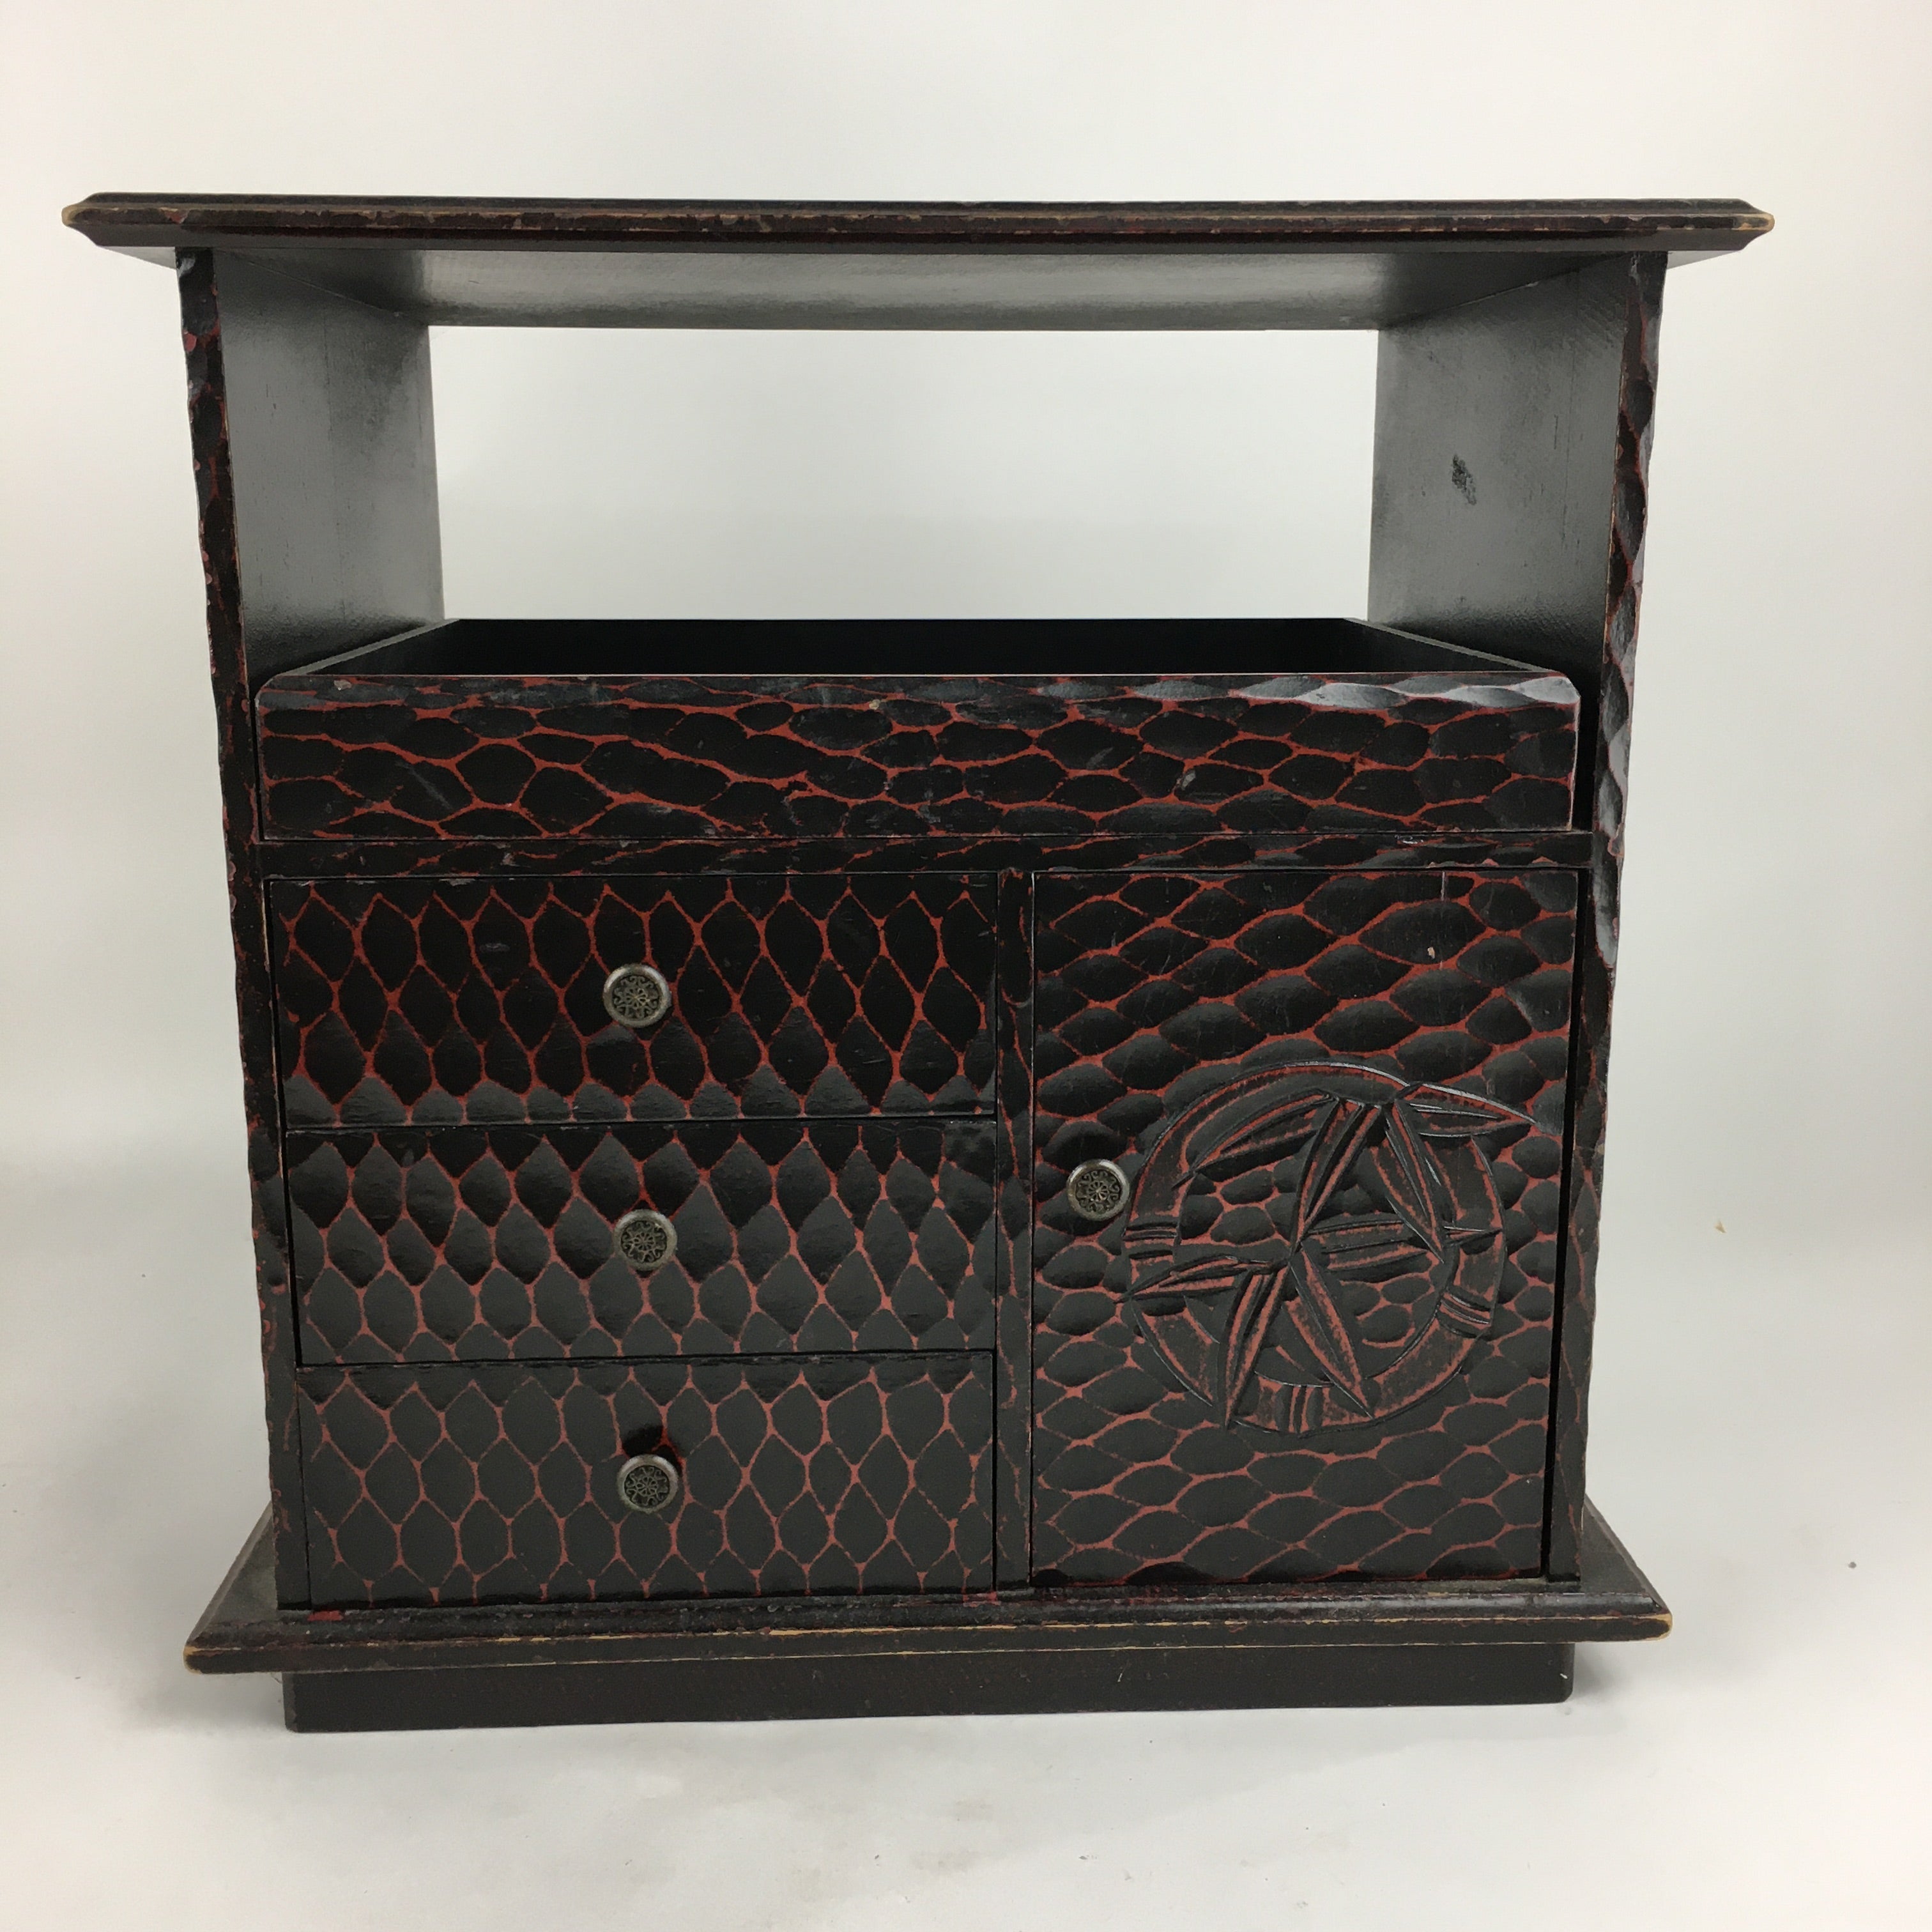 Japanese Wooden Lacquered Kamakura-Bori Tansu Vtg Tray Chest Brown Red T294